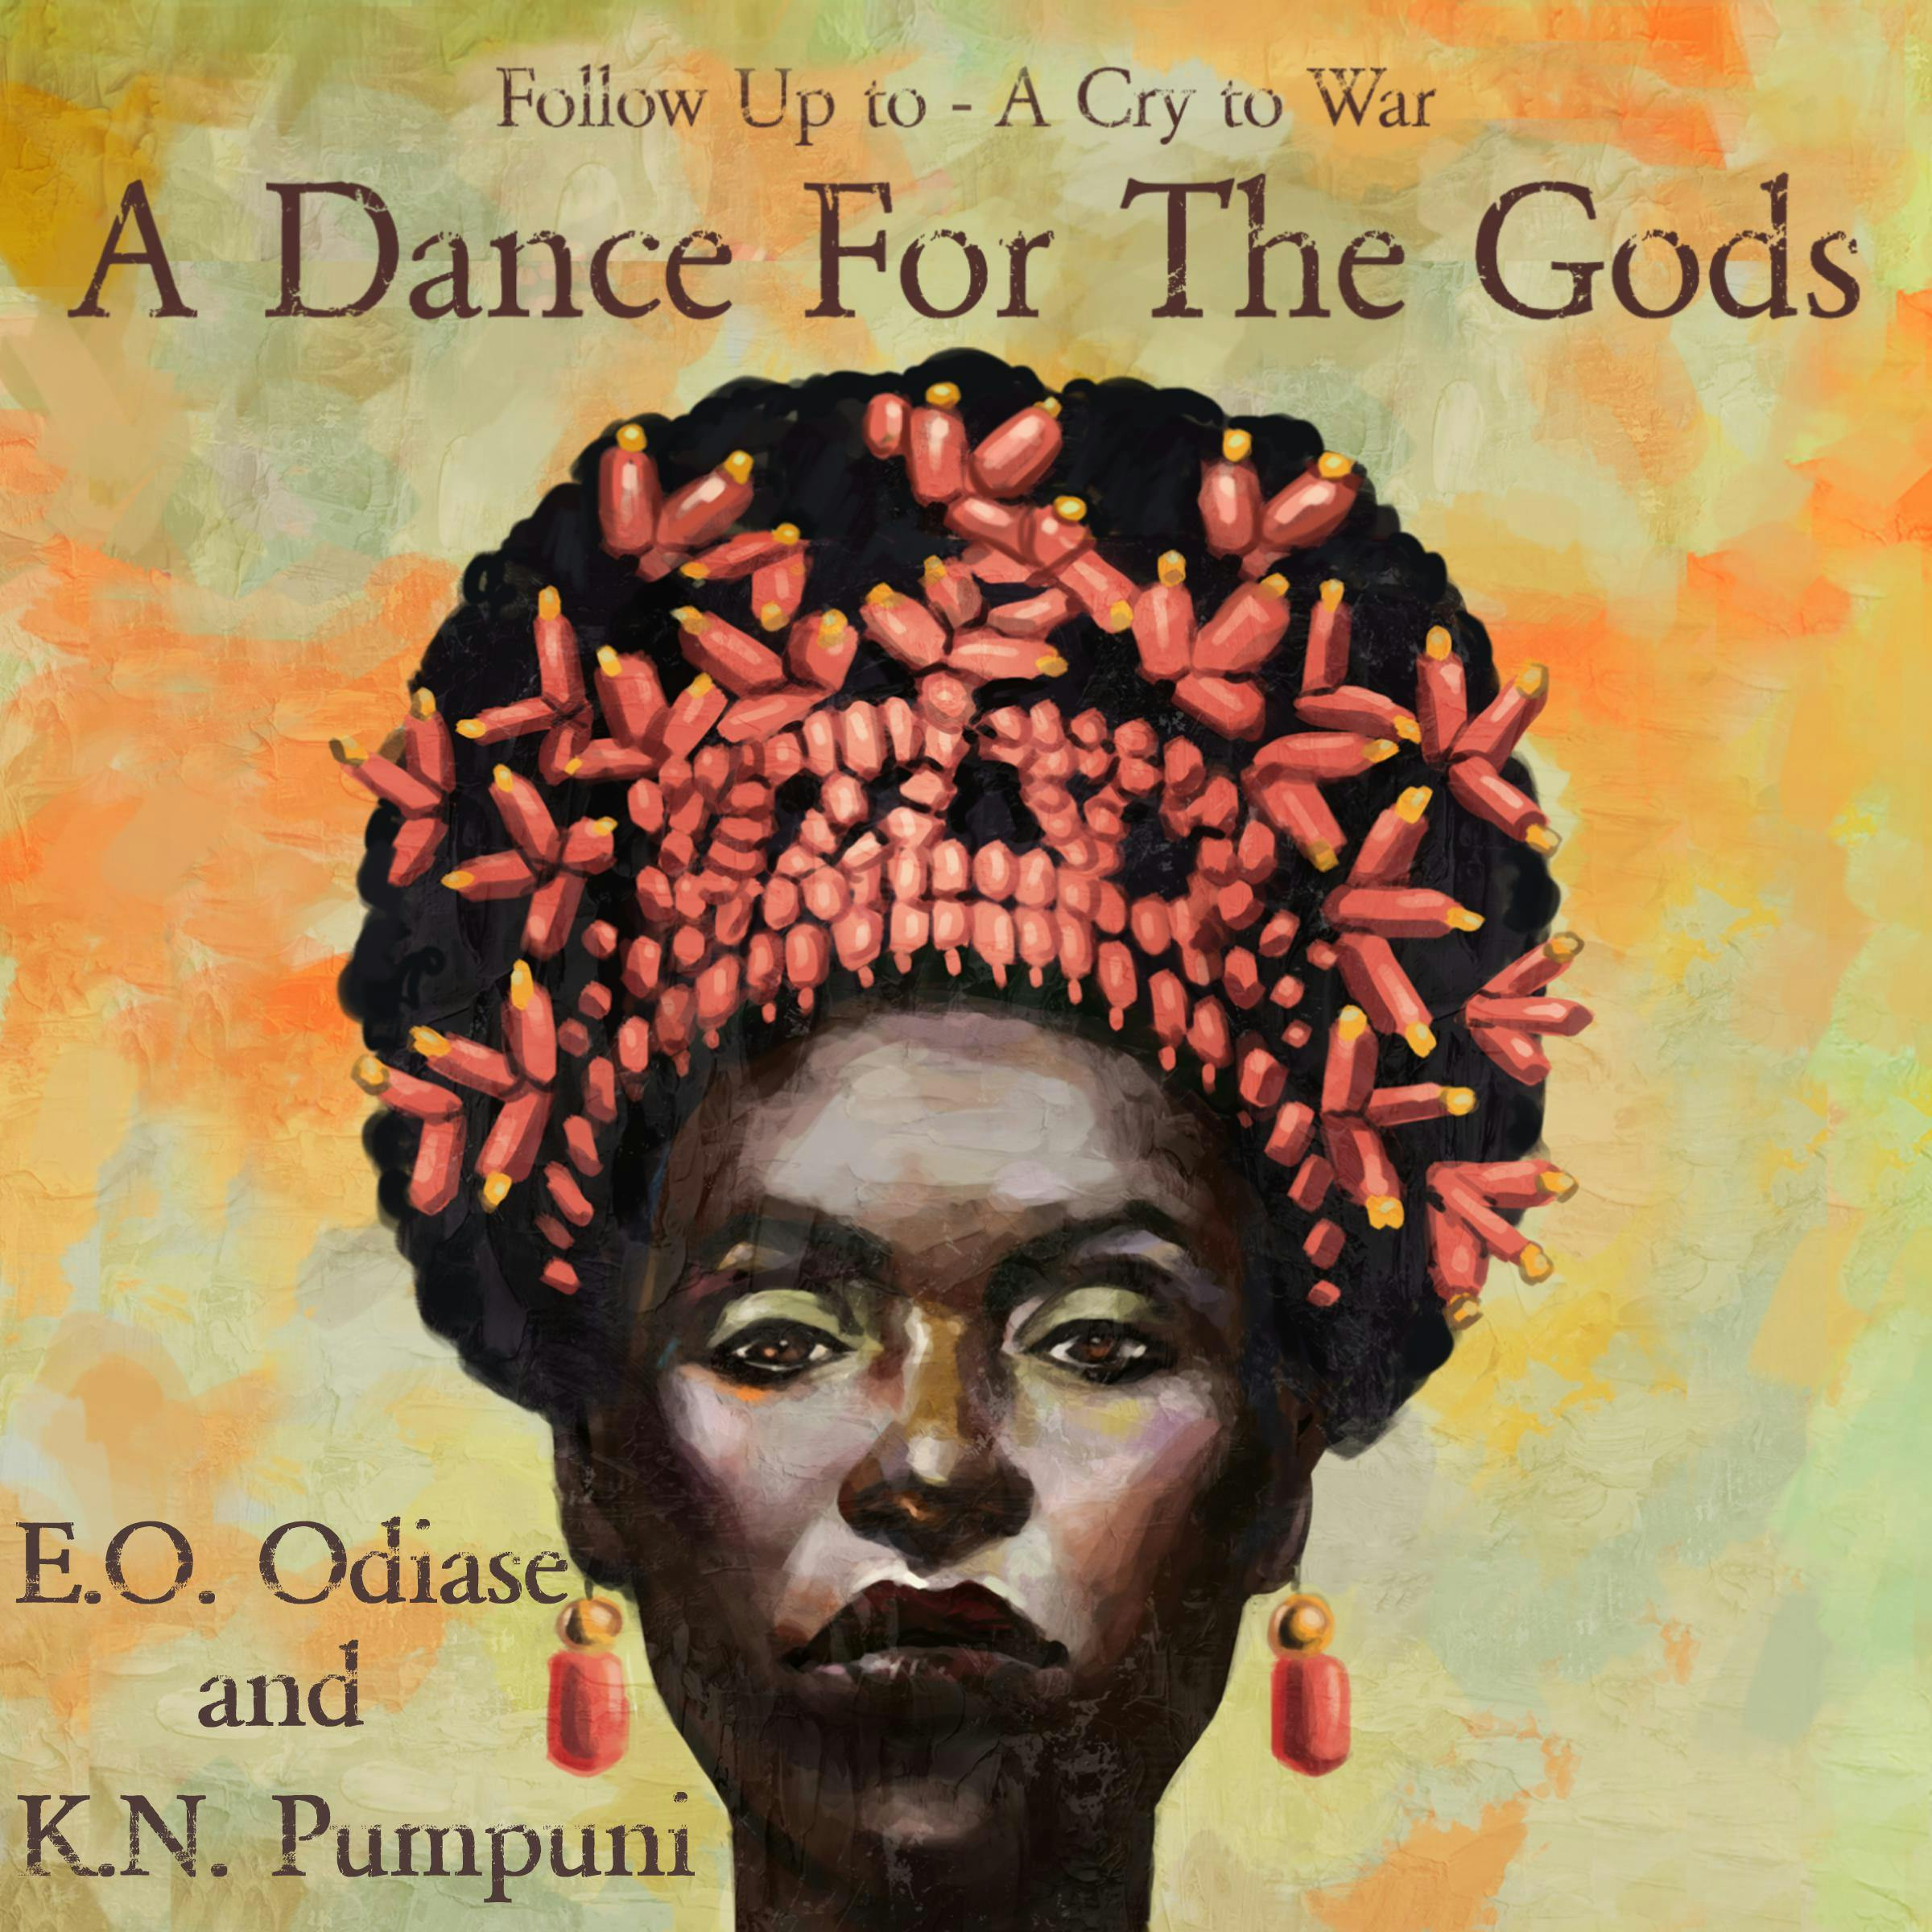 A Dance For The Gods: Sequel to A Cry to War - E.O. Odiase and K.N. Pumpuni